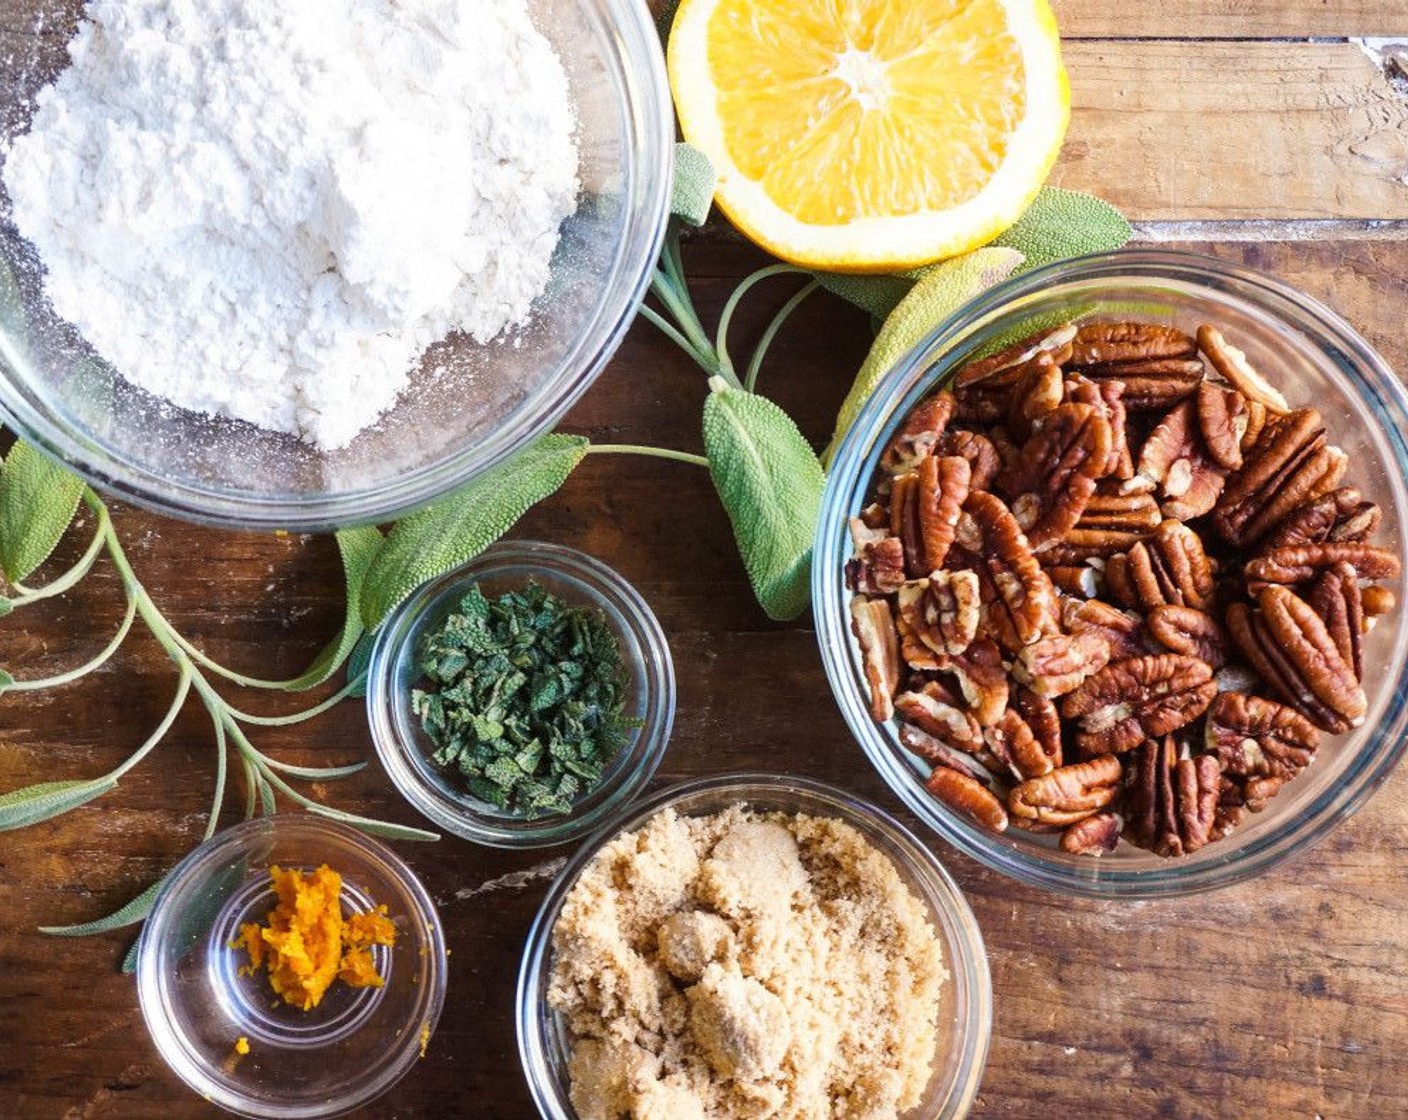 step 10 For the topping, combine the All-Purpose Flour (1/2 cup), Brown Sugar (1/4 cup), Pecans (1 cup), Sage Leaves (6), Kosher Salt (1 pinch), and Orange (1/2 Tbsp) in a bowl. Taste for flavor and adjust as needed.